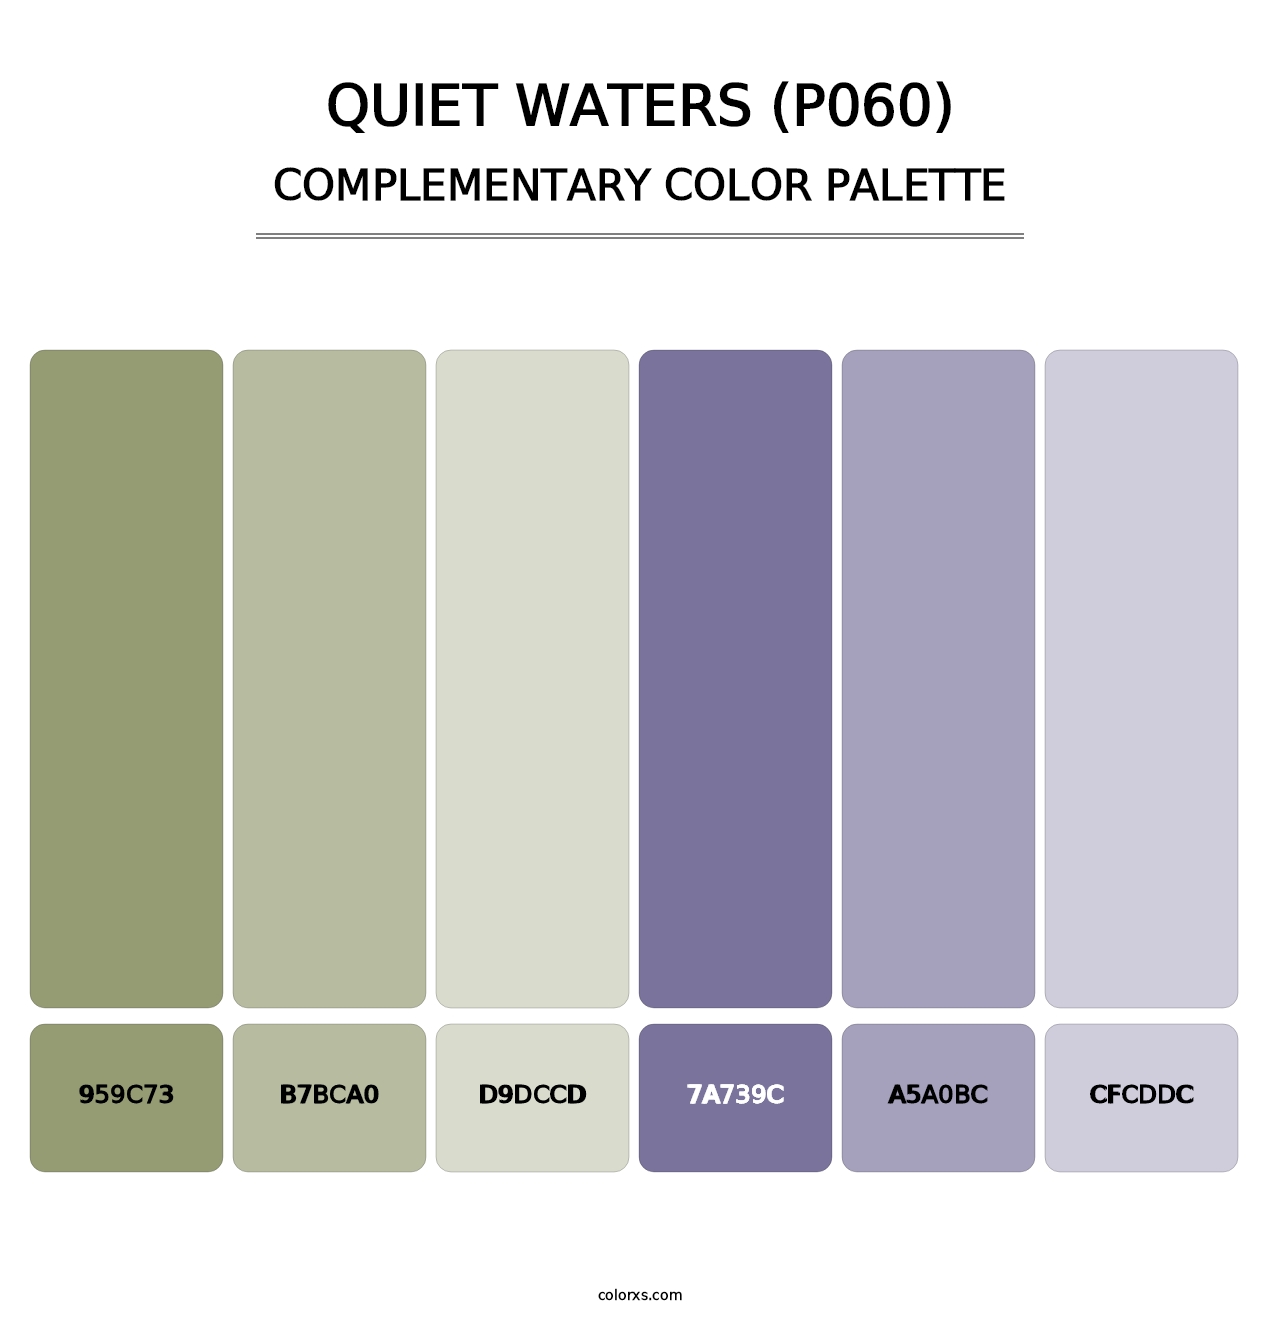 Quiet Waters (P060) - Complementary Color Palette